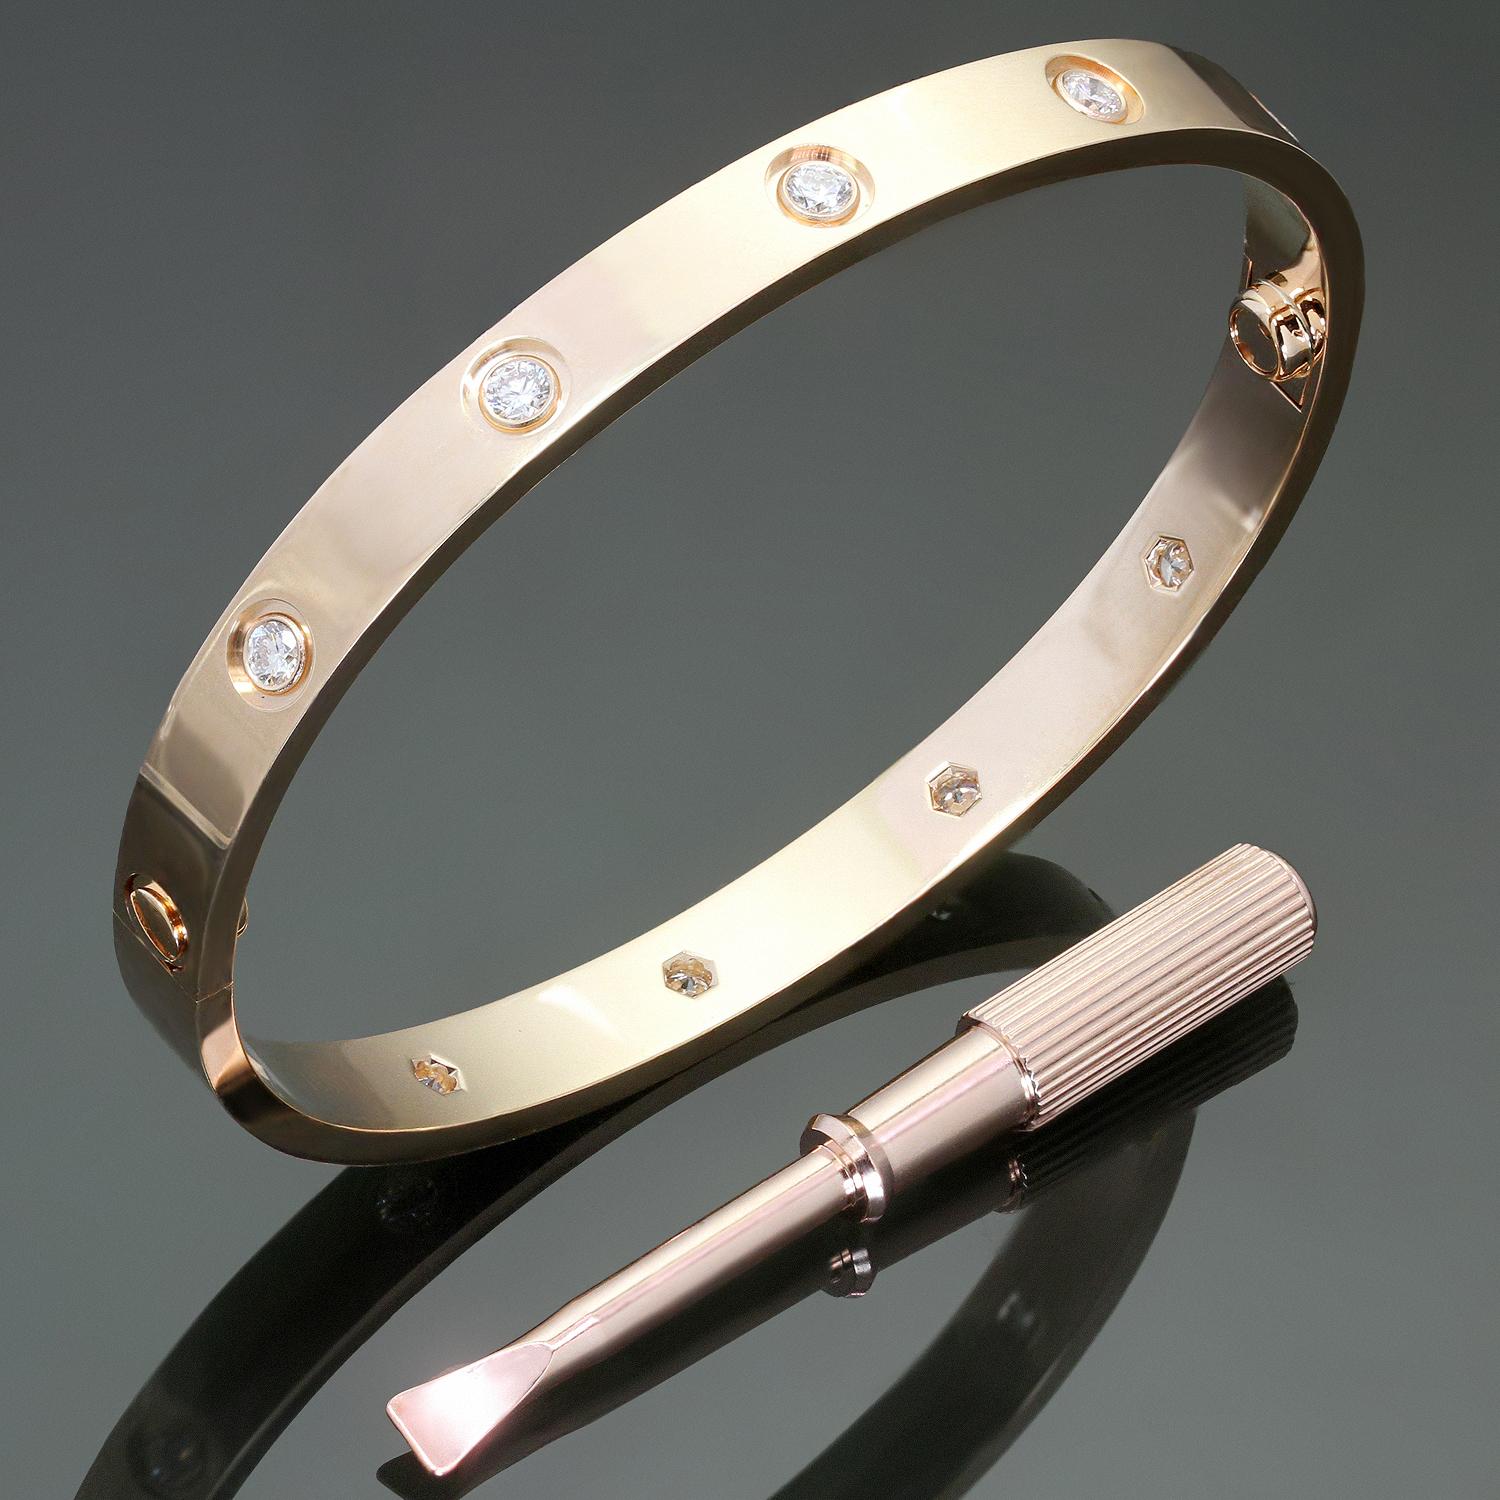 This iconic and timeless bracelet from Cartier's Love collection is crafted in 18k rose gold and set with 10 brilliant-cut round D-F VVS1-VVS2 diamonds of an estimated 1.0 carats. Completed with the original Cartier screwdriver and box. This is the